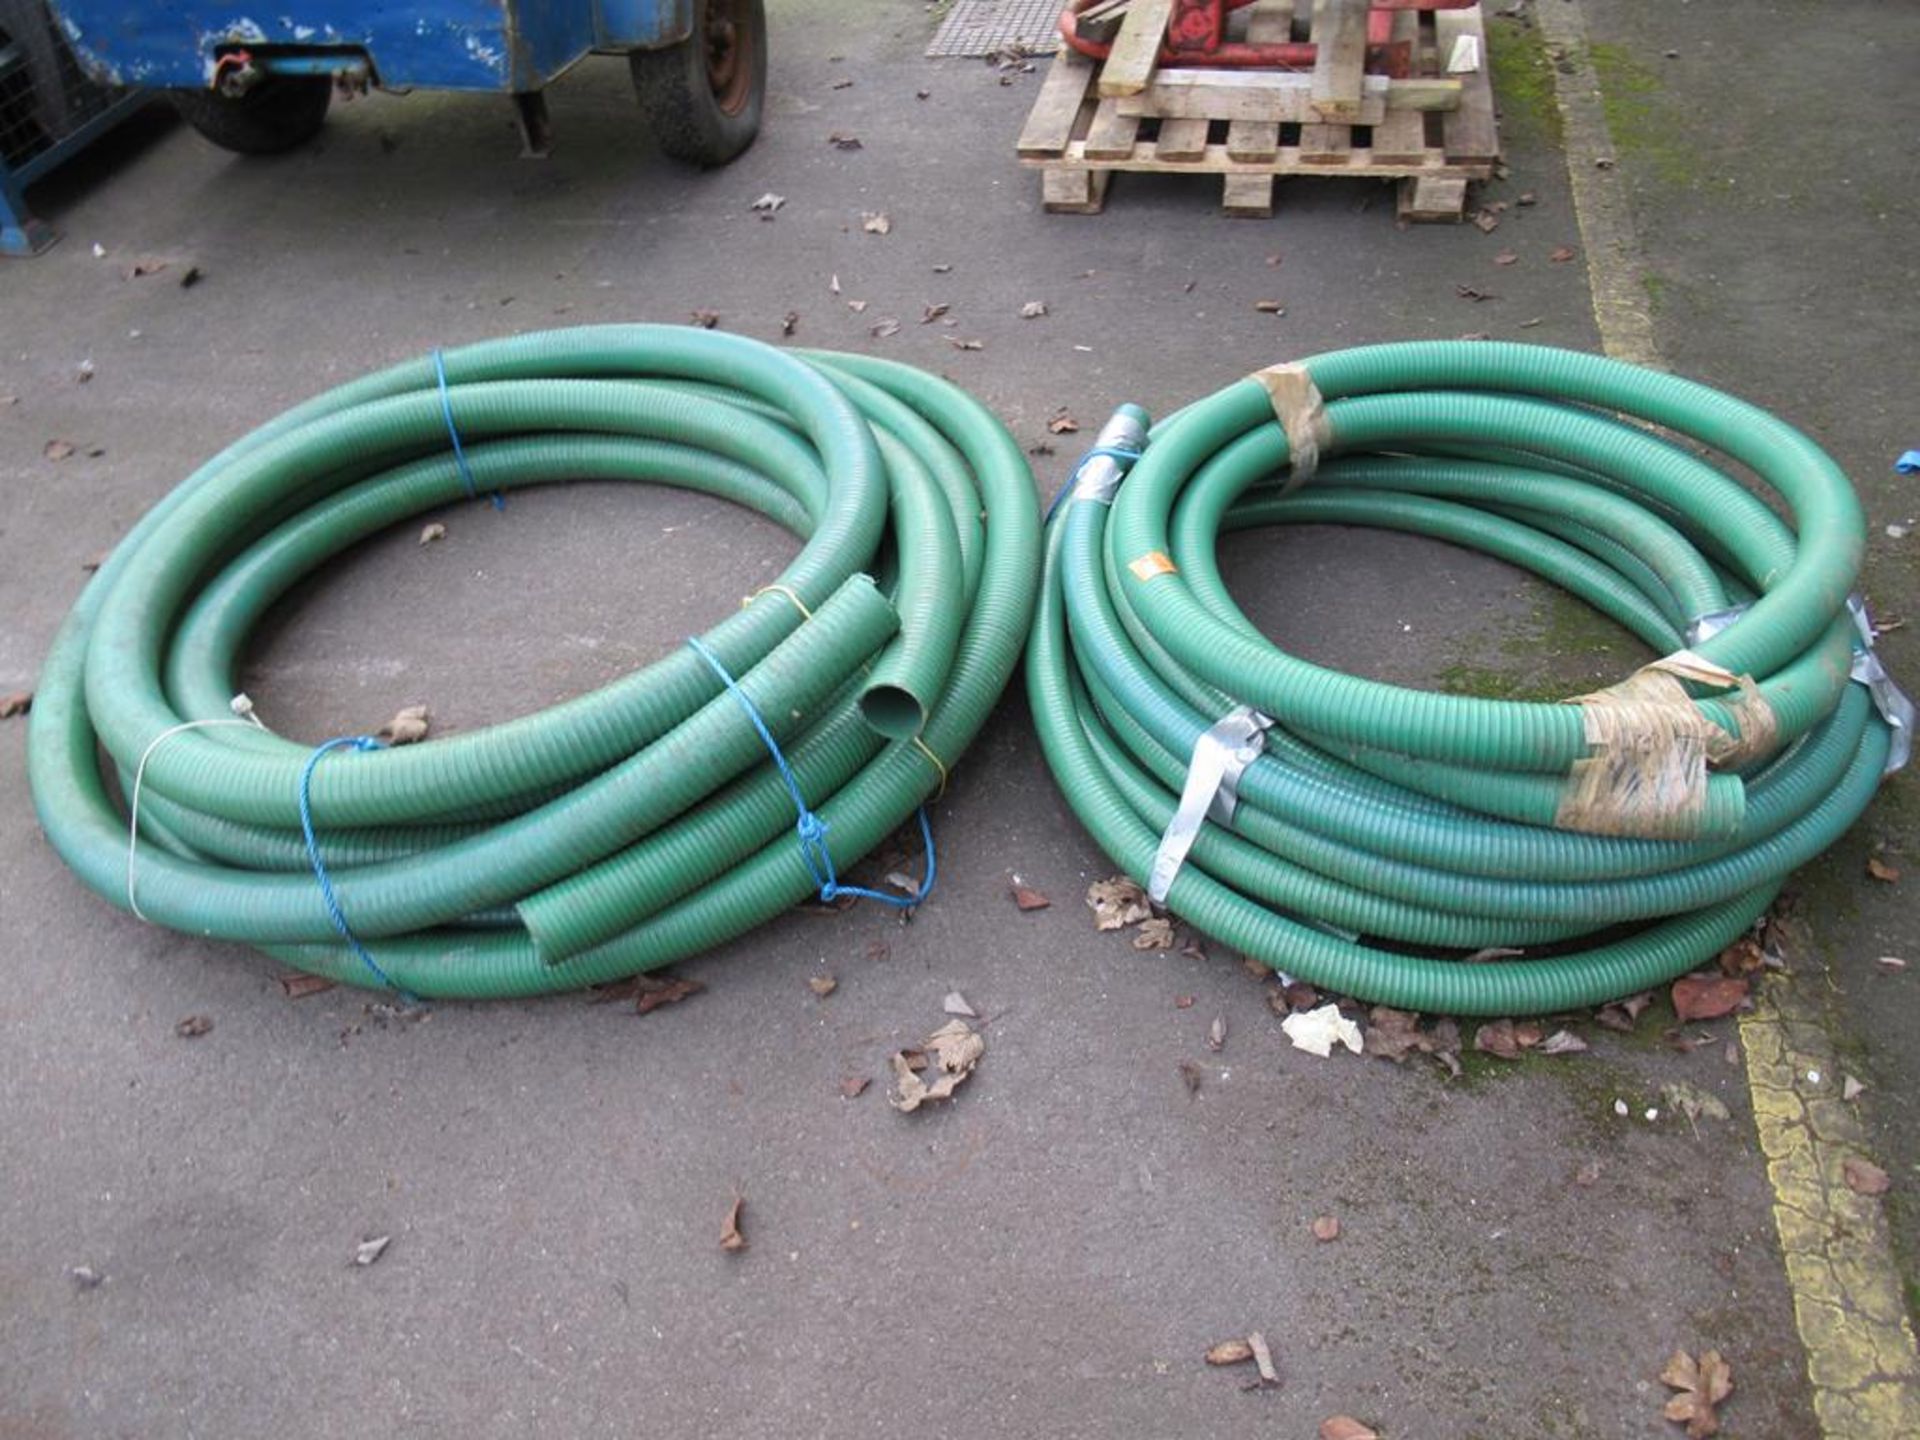 2 x Reels of Green Irrigation Piping - Image 2 of 3